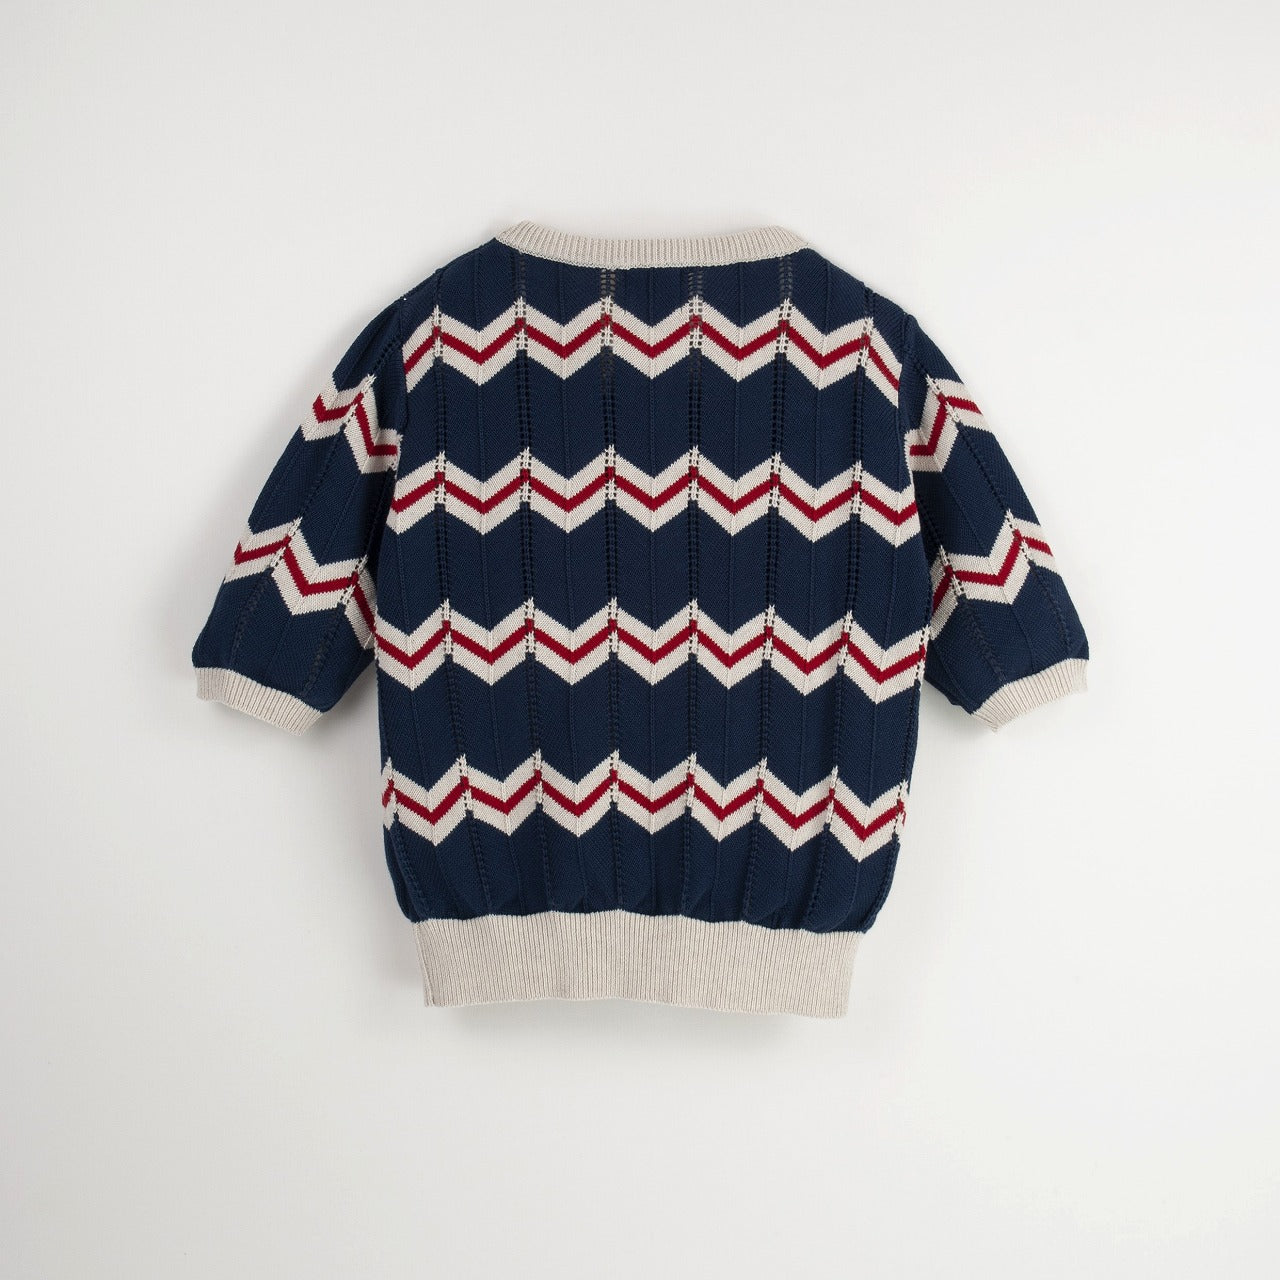 【Popelin】【30%OFF】Navy Blue openwork knit jersey ニットジャージー 12/18m,18/24m  | Coucoubebe/ククベベ